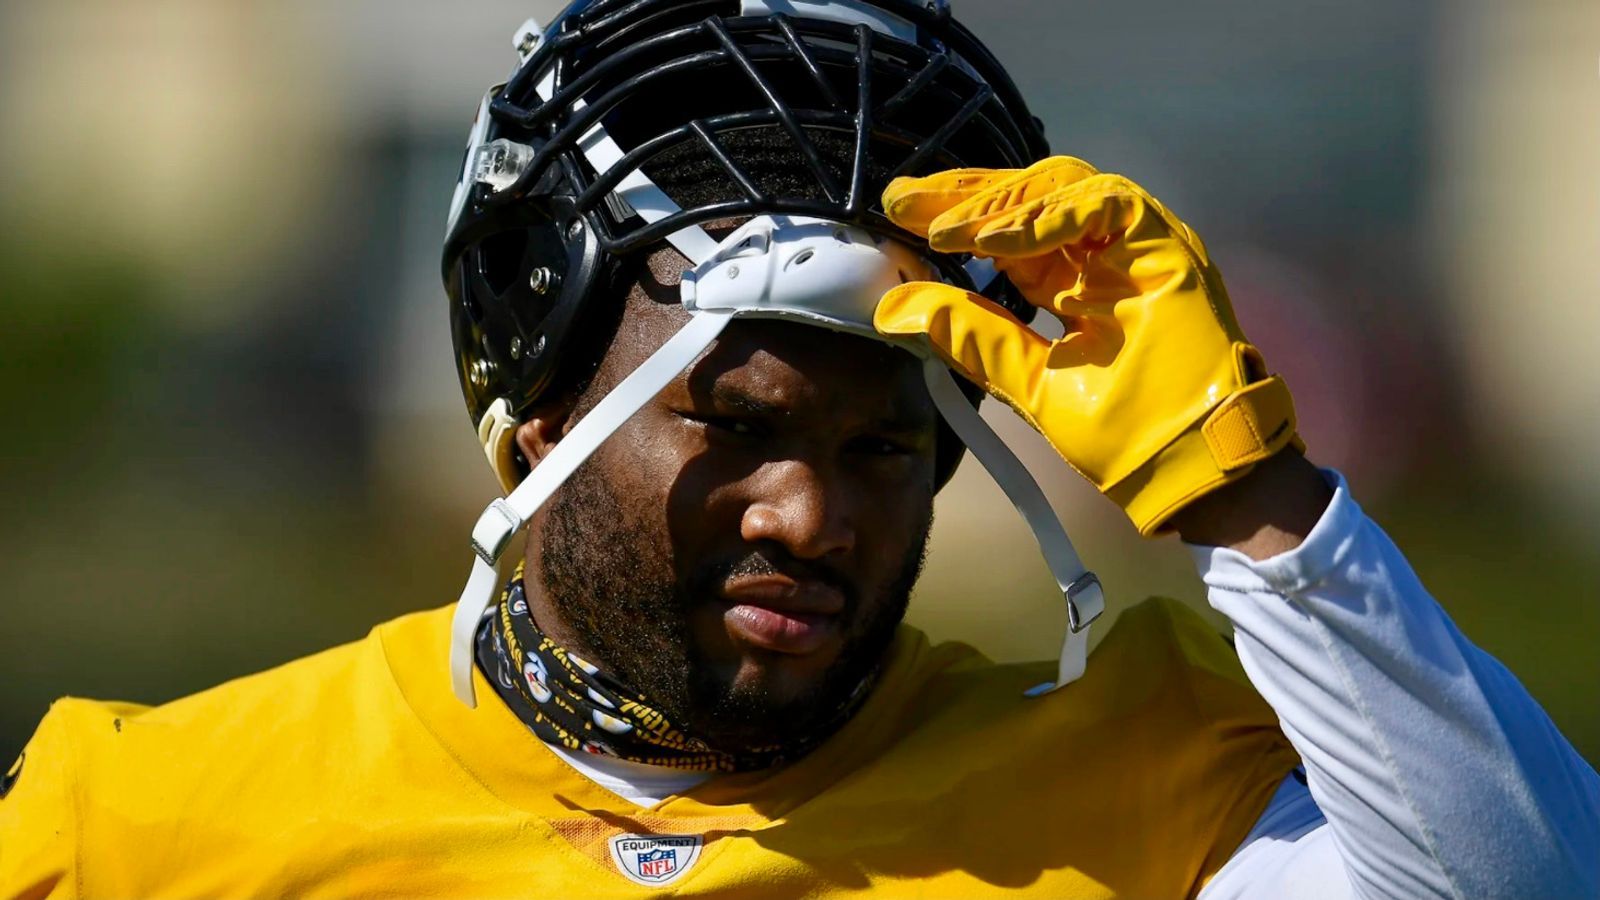 Stephon Tuitt, current owner of Steelers No. 91, honors Kevin